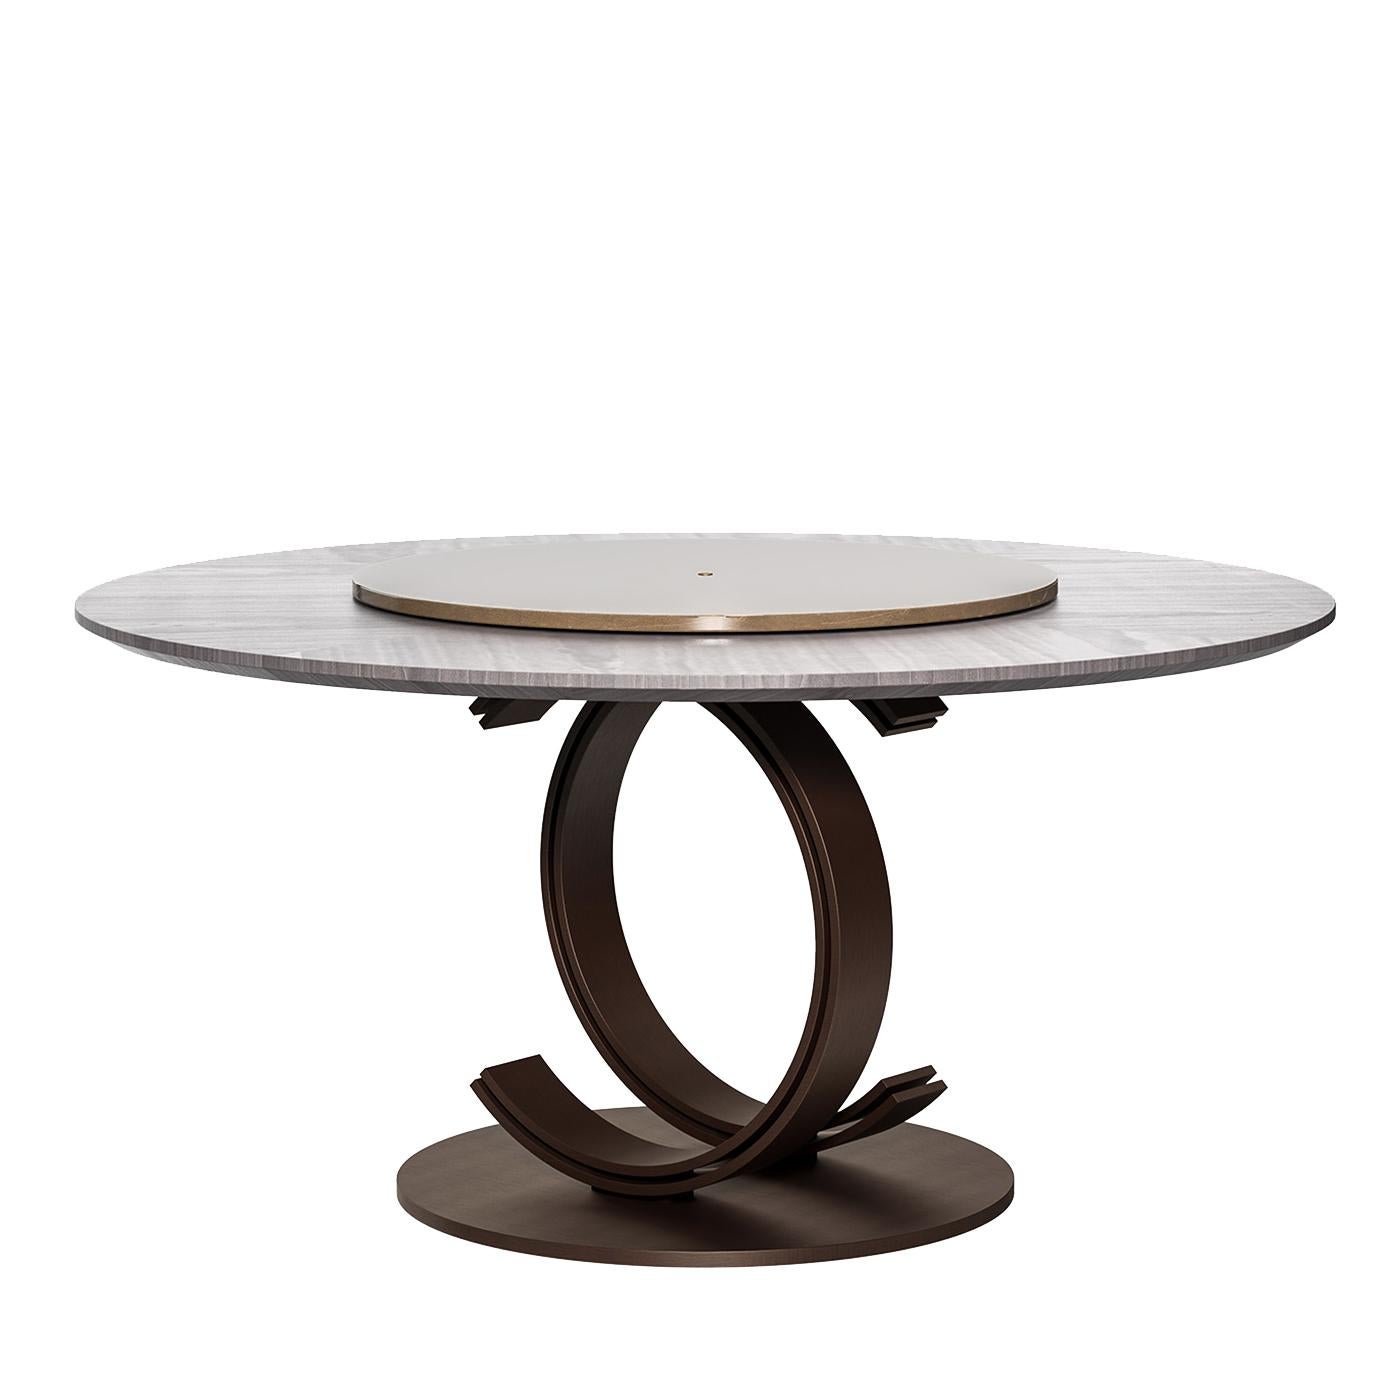 round table with lazy susan built in